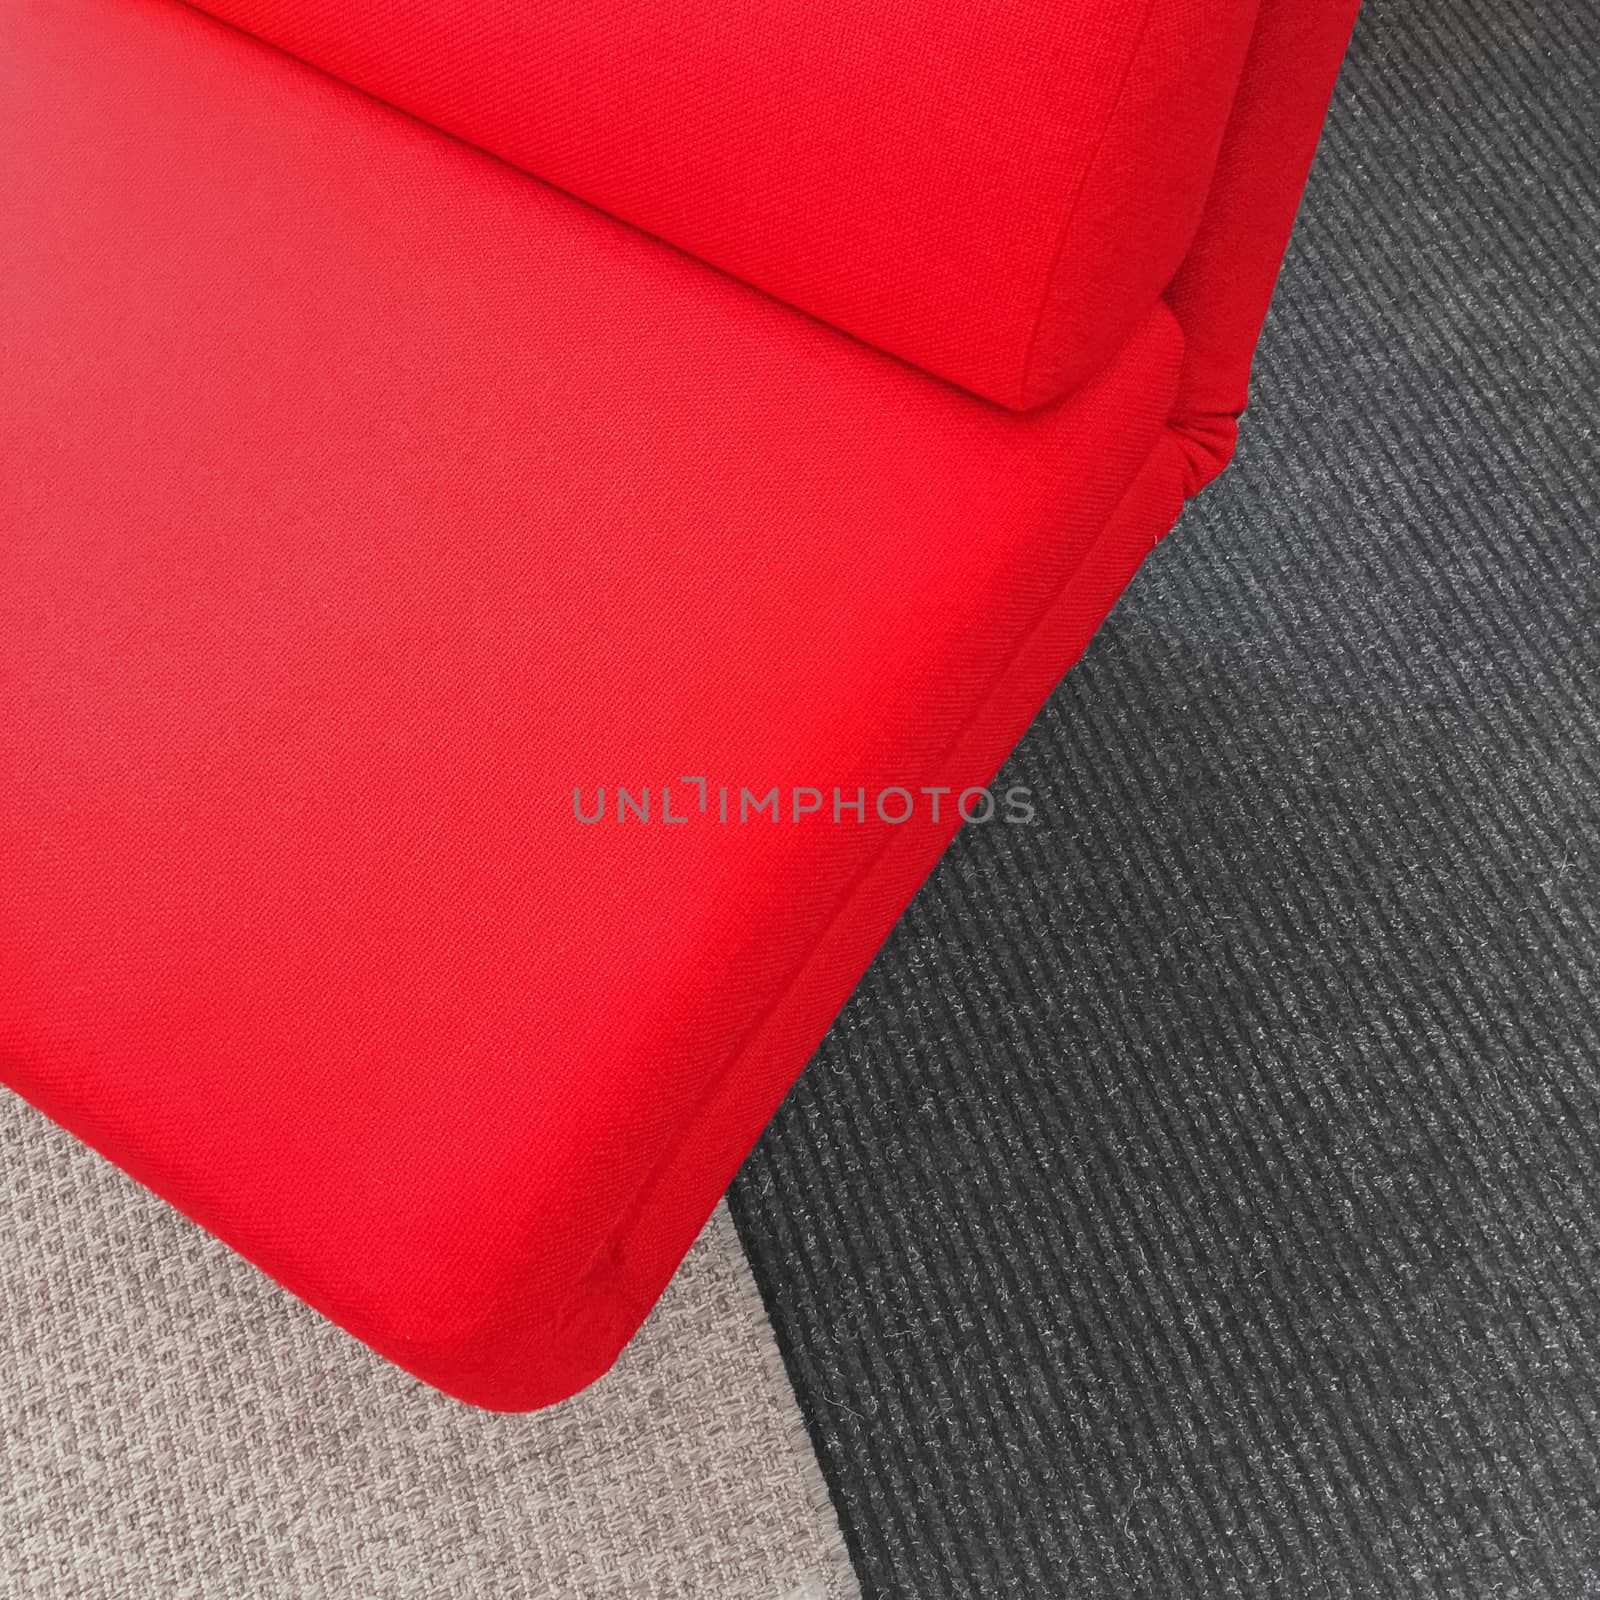 Vibrant soft red chair on gray carpet by anikasalsera